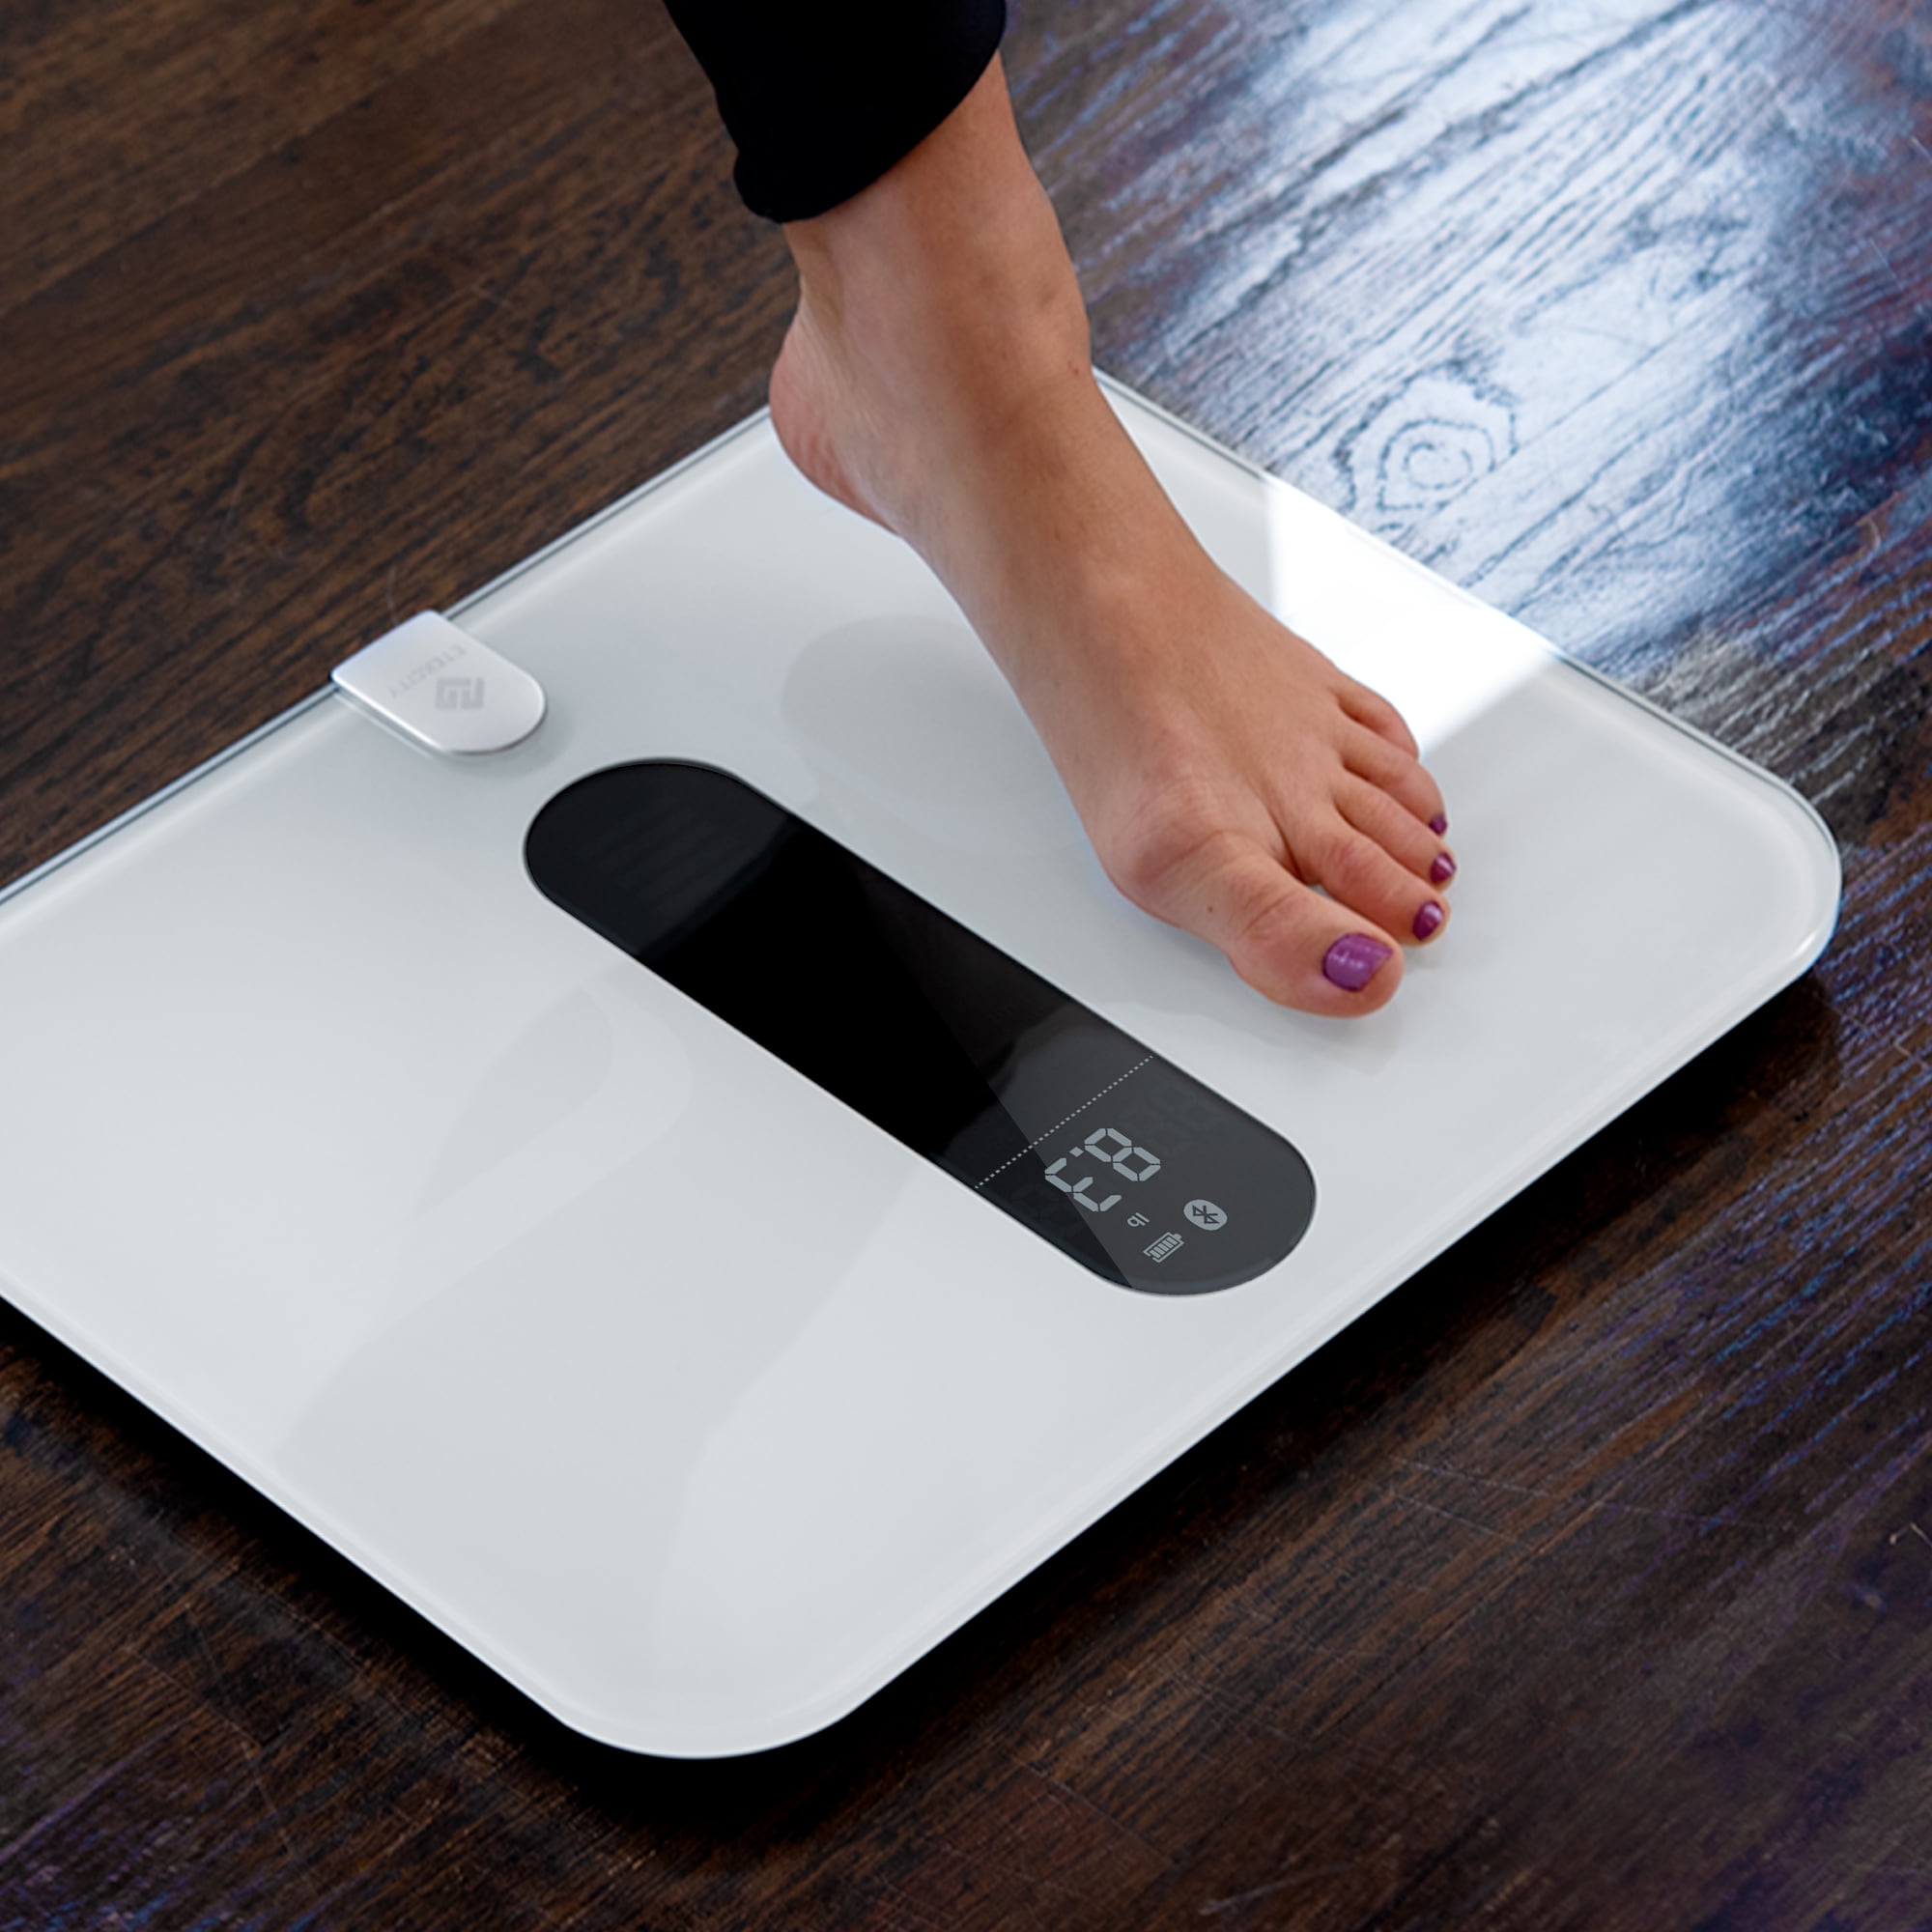 Etekcity Smart Fitness Scale with Resistance Bands in Black